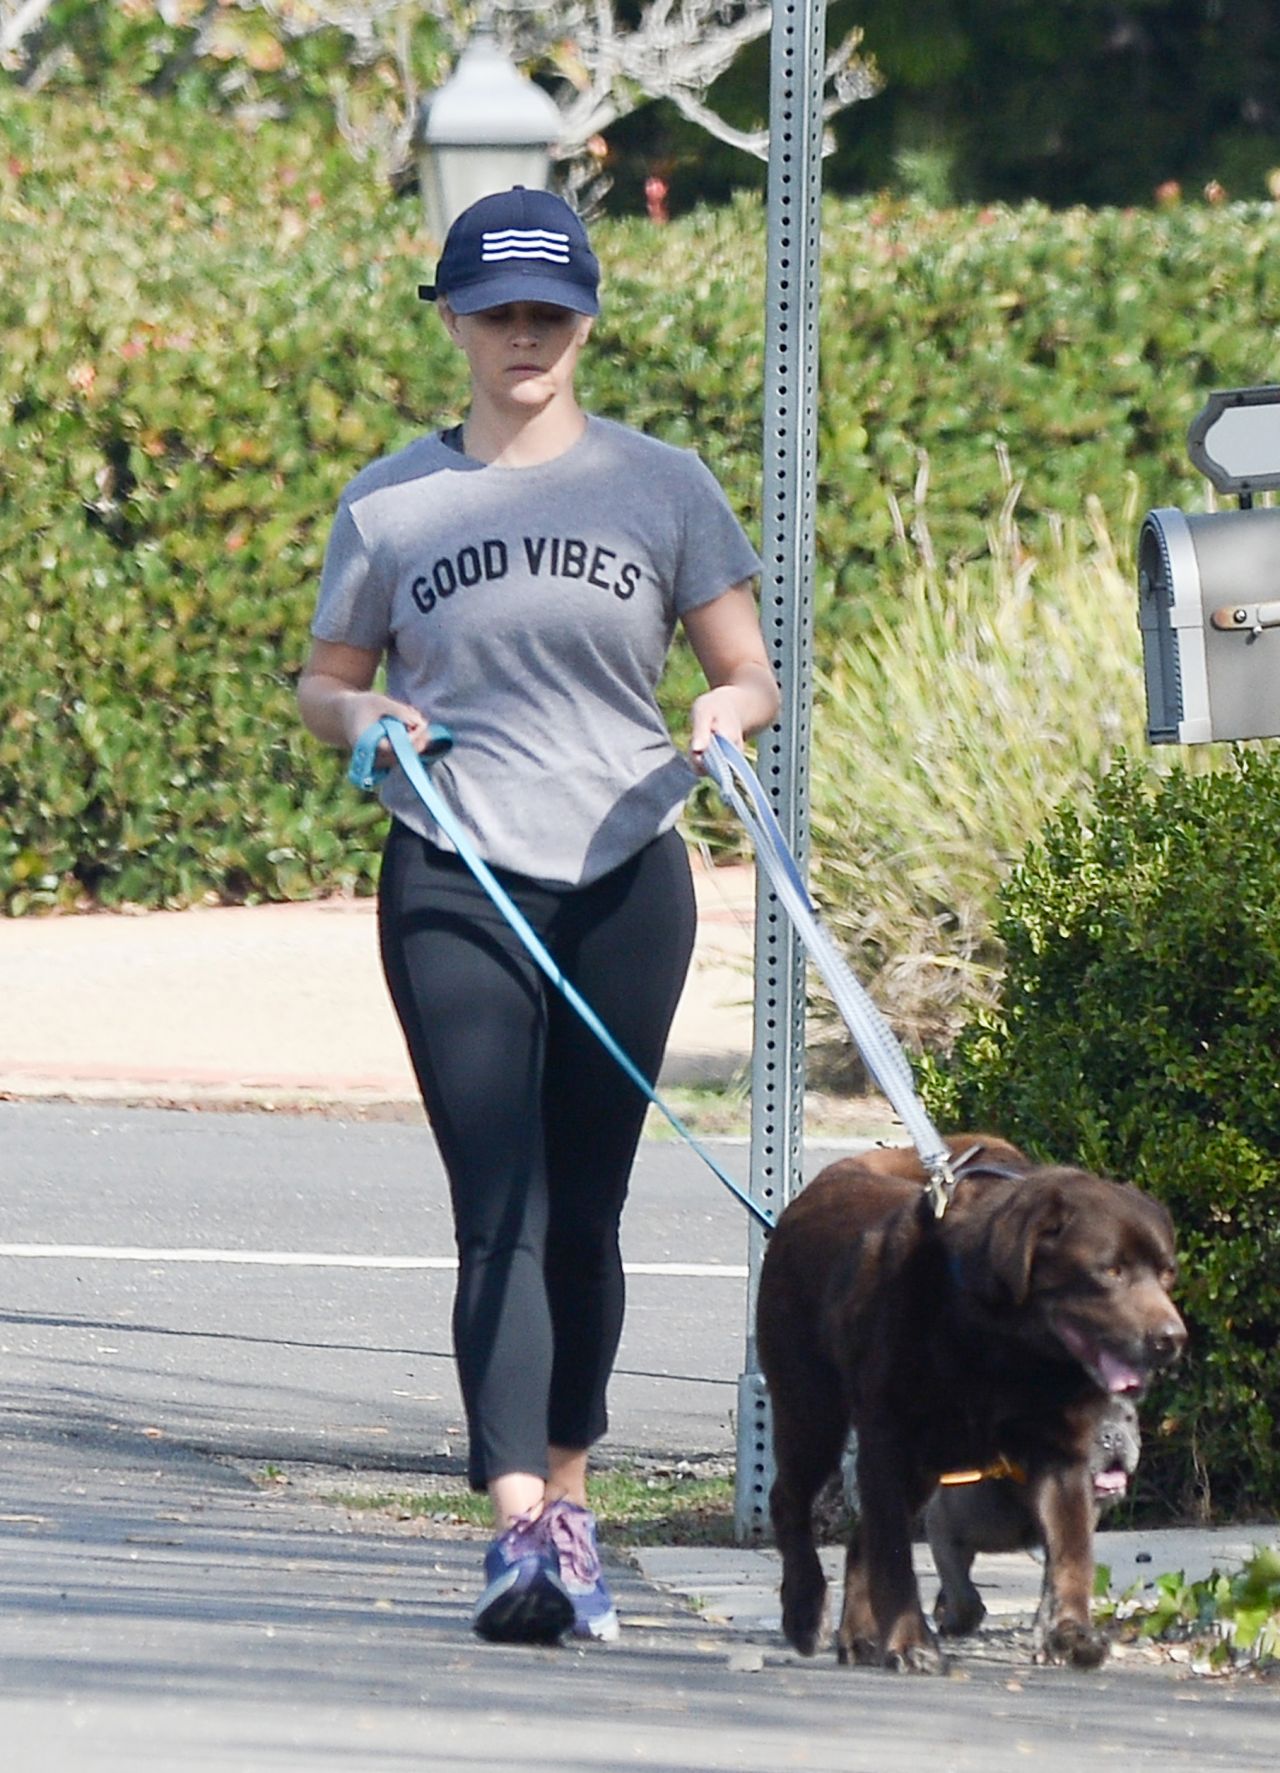 reese-witherspoon-taking-her-dogs-out-for-a-walk-10-29-2018-2.jpg